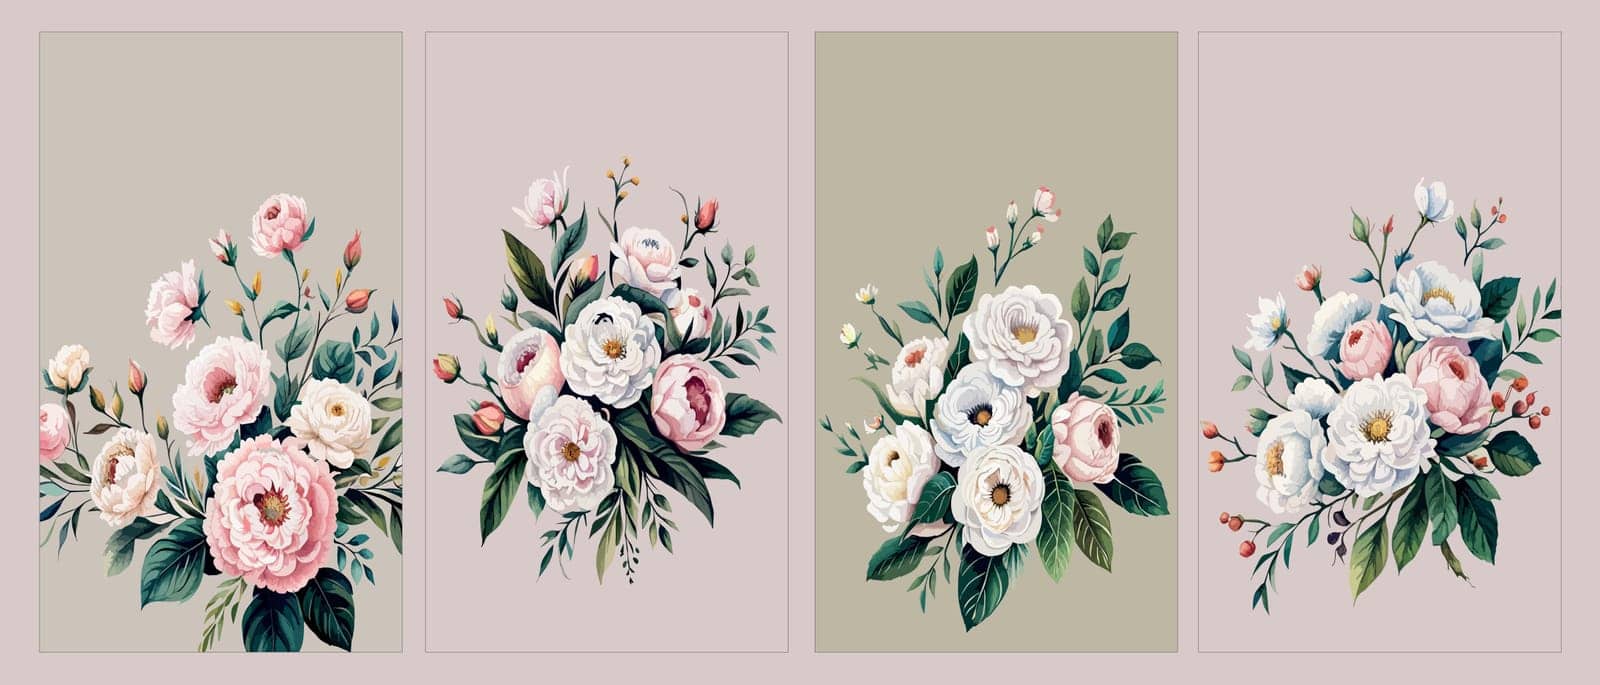 Banner set floral pattern with peonies on light background, watercolor. Template design for textiles, interior, clothes, wallpaper. Botanical art vector illustration